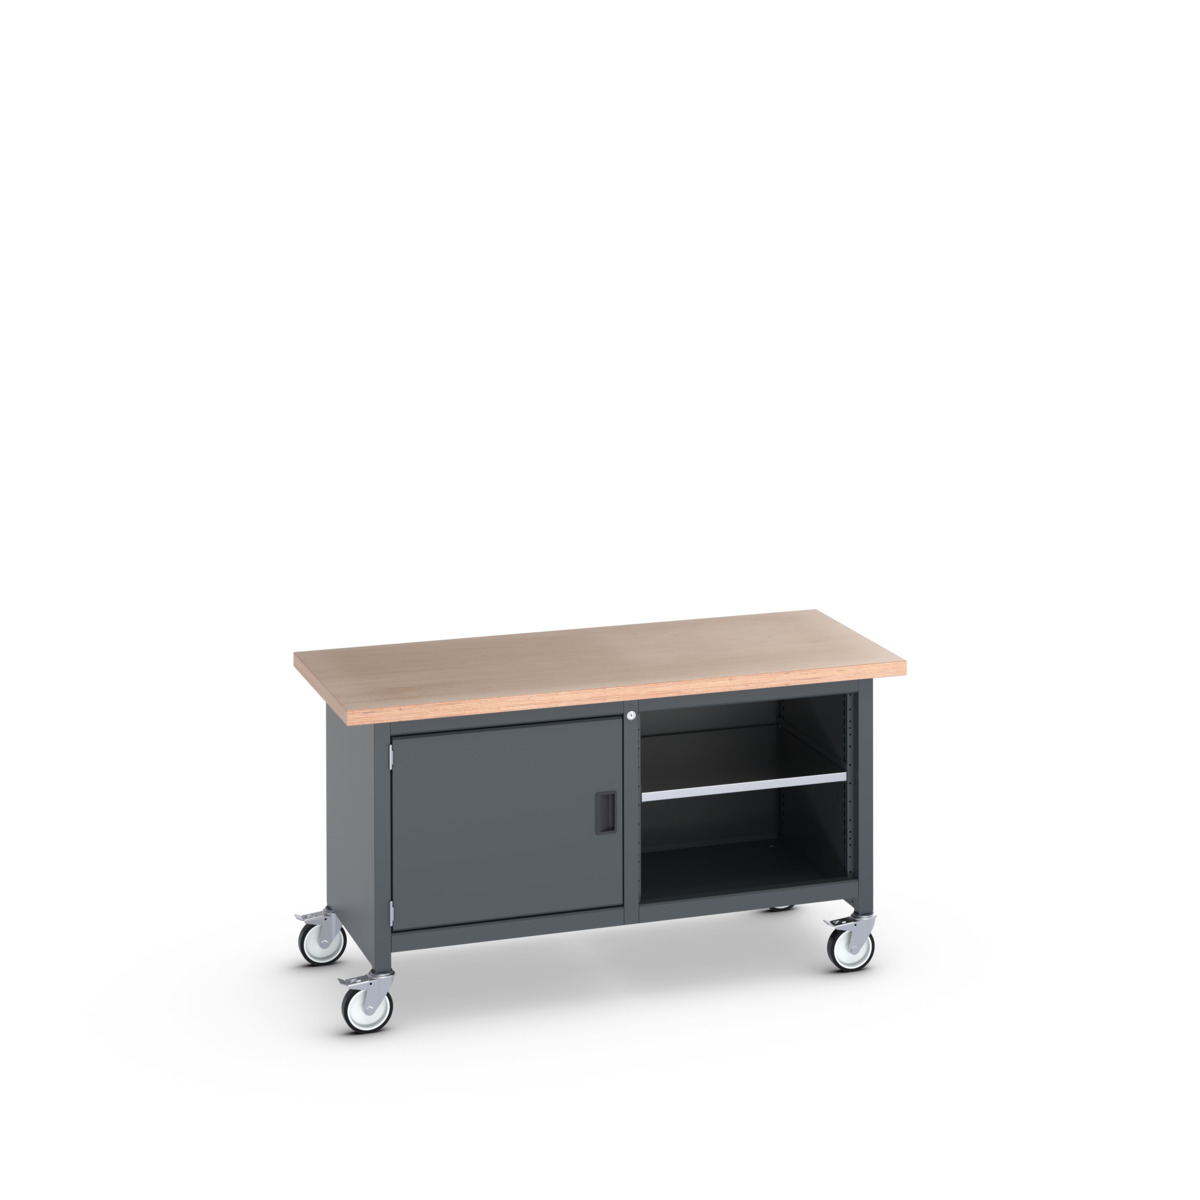 41002094.77V - cubio mobile storage bench (mpx)